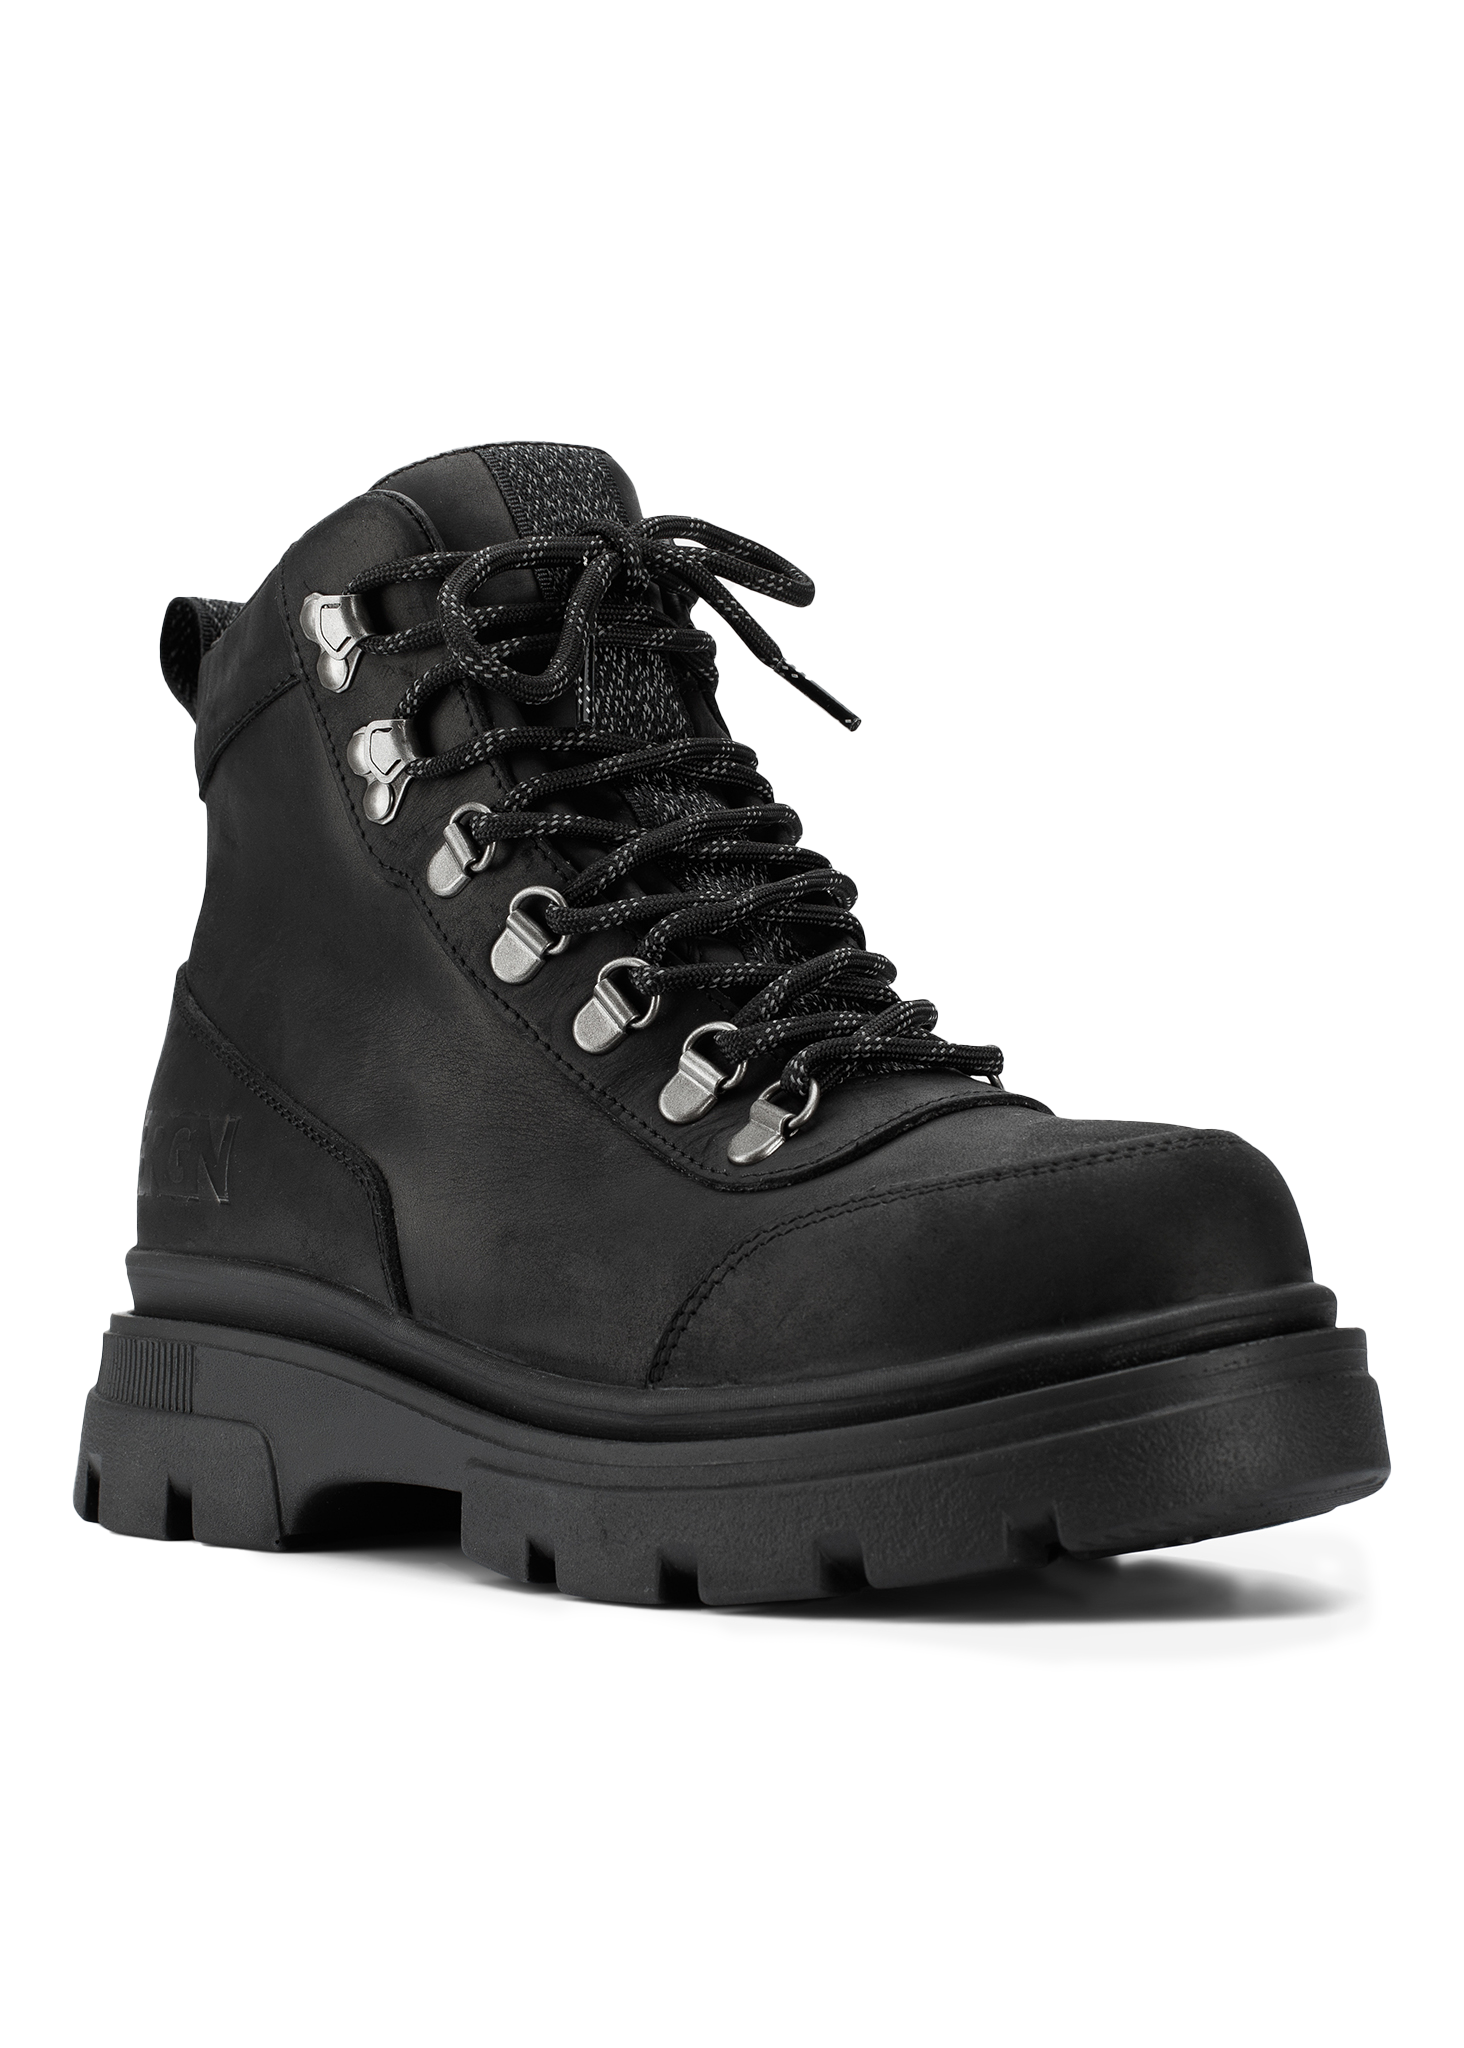 BRGN Hiking Boots Shoes 095 New Black